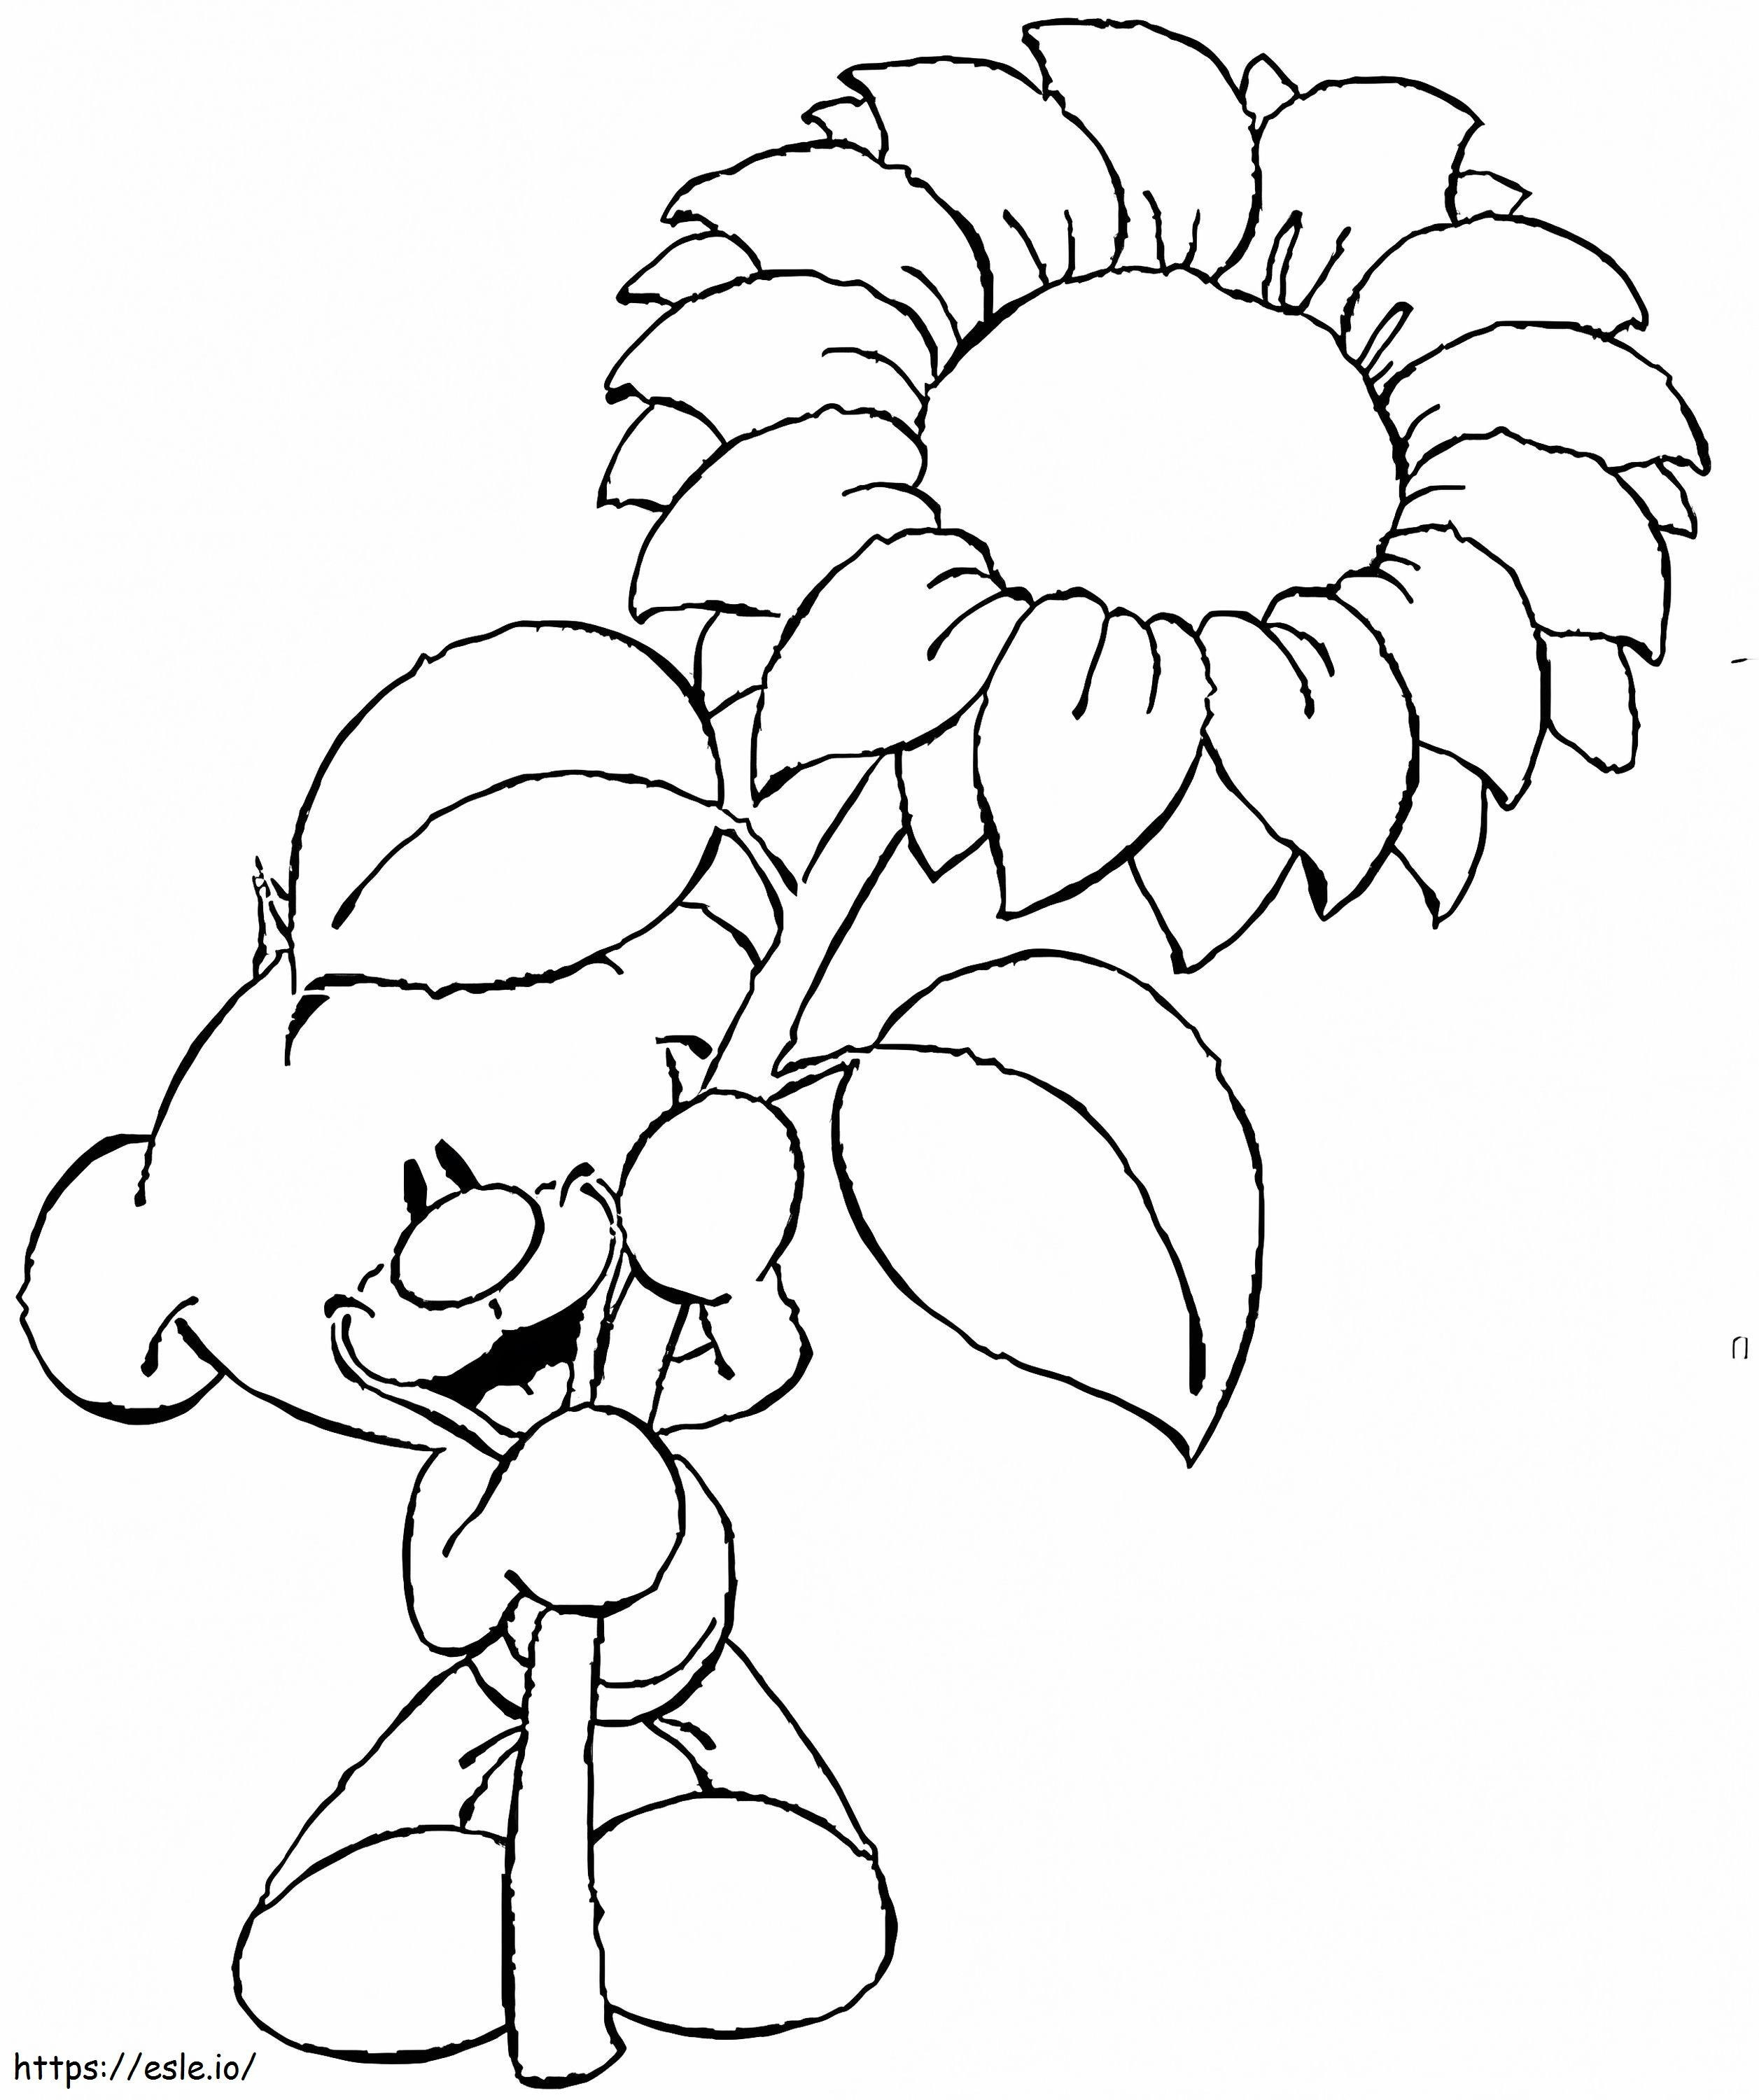 Pimboli With Sunflower coloring page